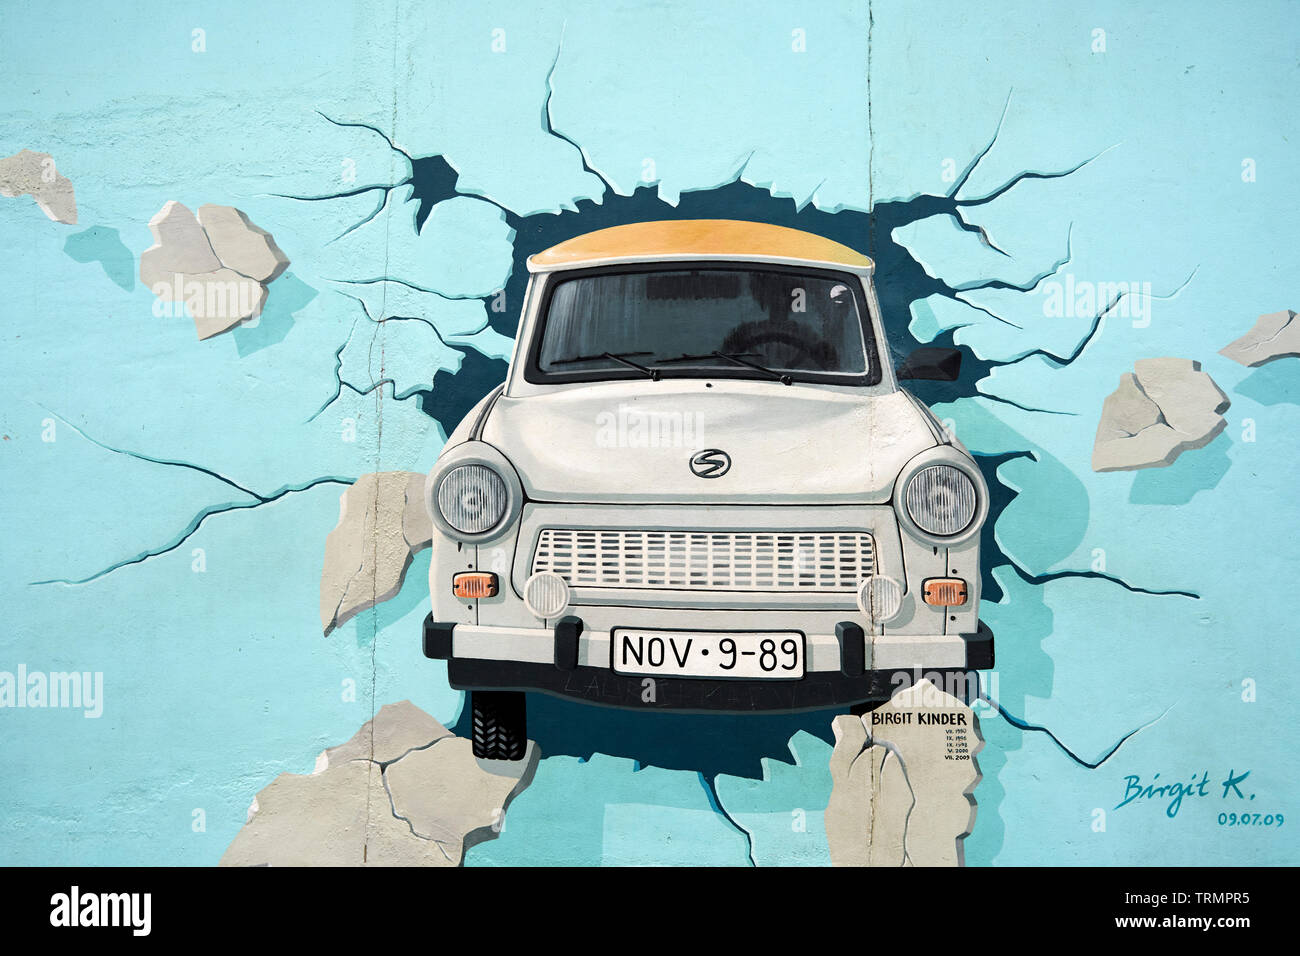 Work by Birgit Kinder in East Side Gallery on a part of the Berlin Wall. Stock Photo